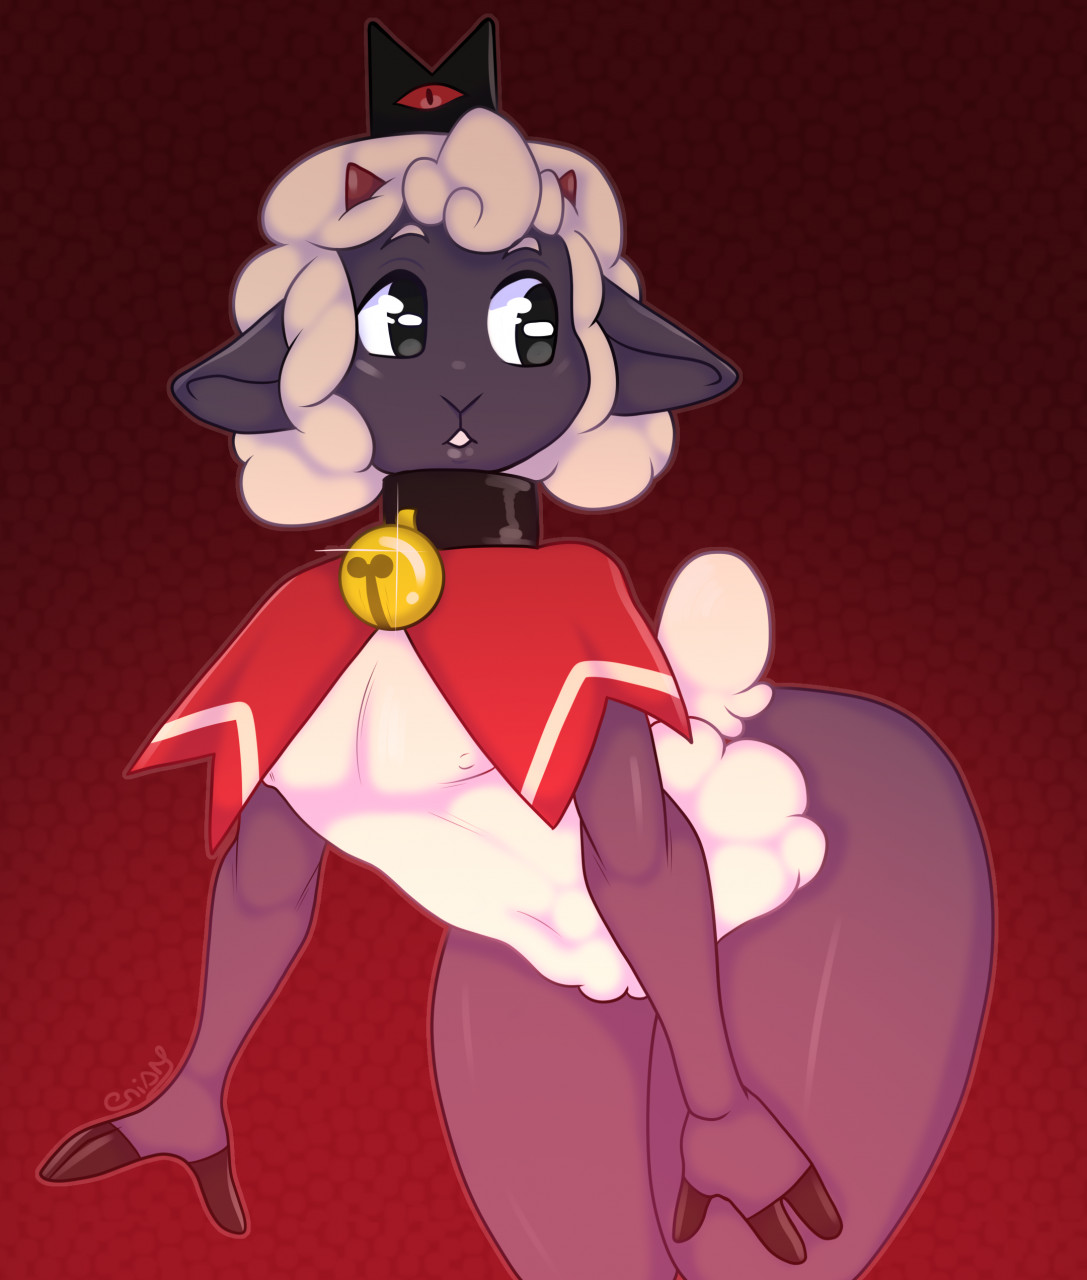 Hondaus Mina on X: I drew a small Fanart of the Lamb from the game, Cult  Of The Lamb! Enjoy! uwu #CultoftheLamb #cultofthelambfanart #furryart  #fanart  / X